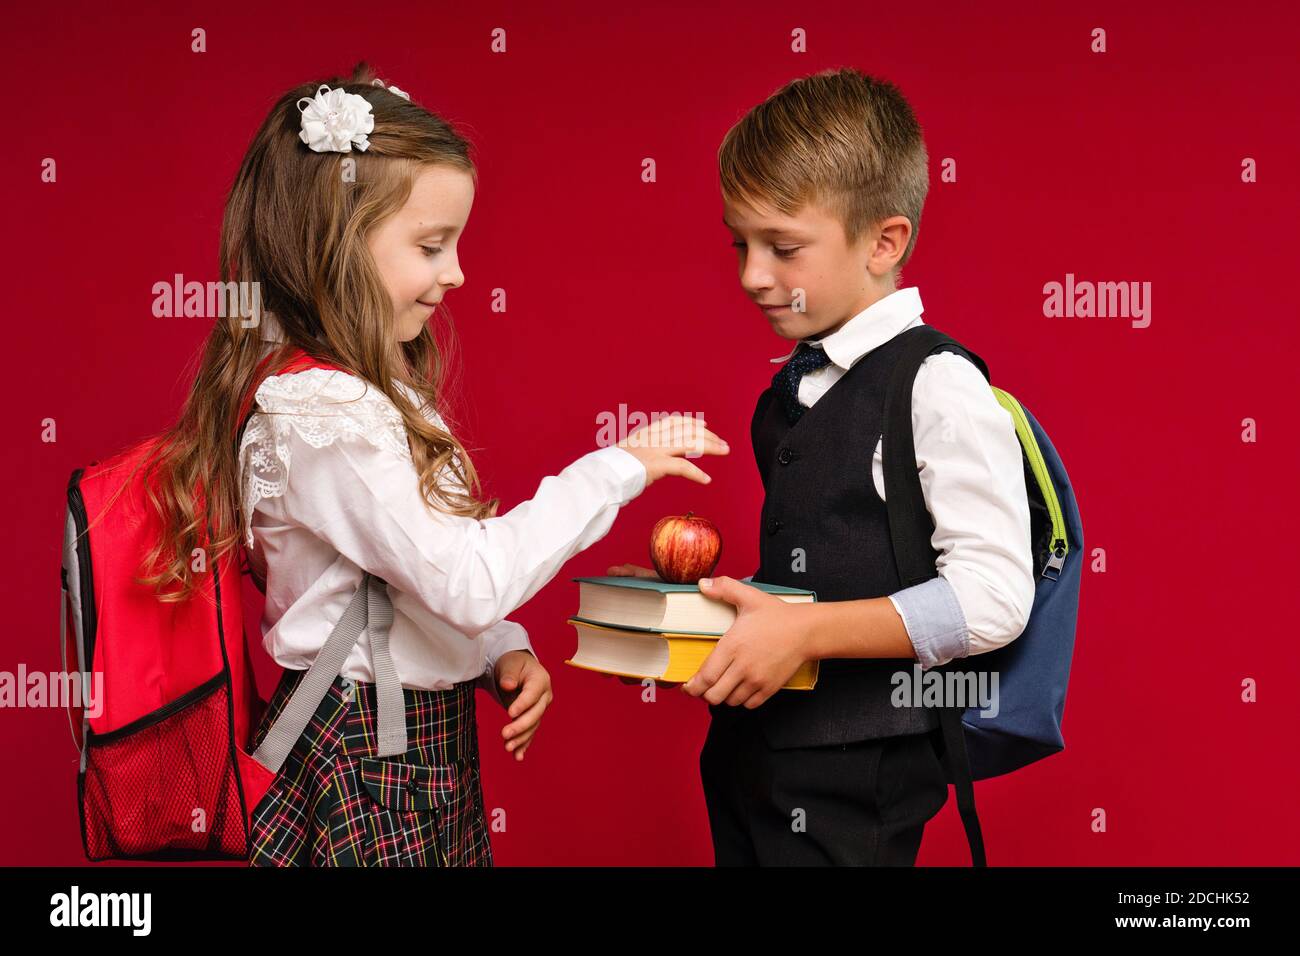 Preteens in school uniform carry backpacks on vivid red colored background. Knowledge day. Back to school. Education and study. Knowledge skills. September 1. School time. Stock Photo